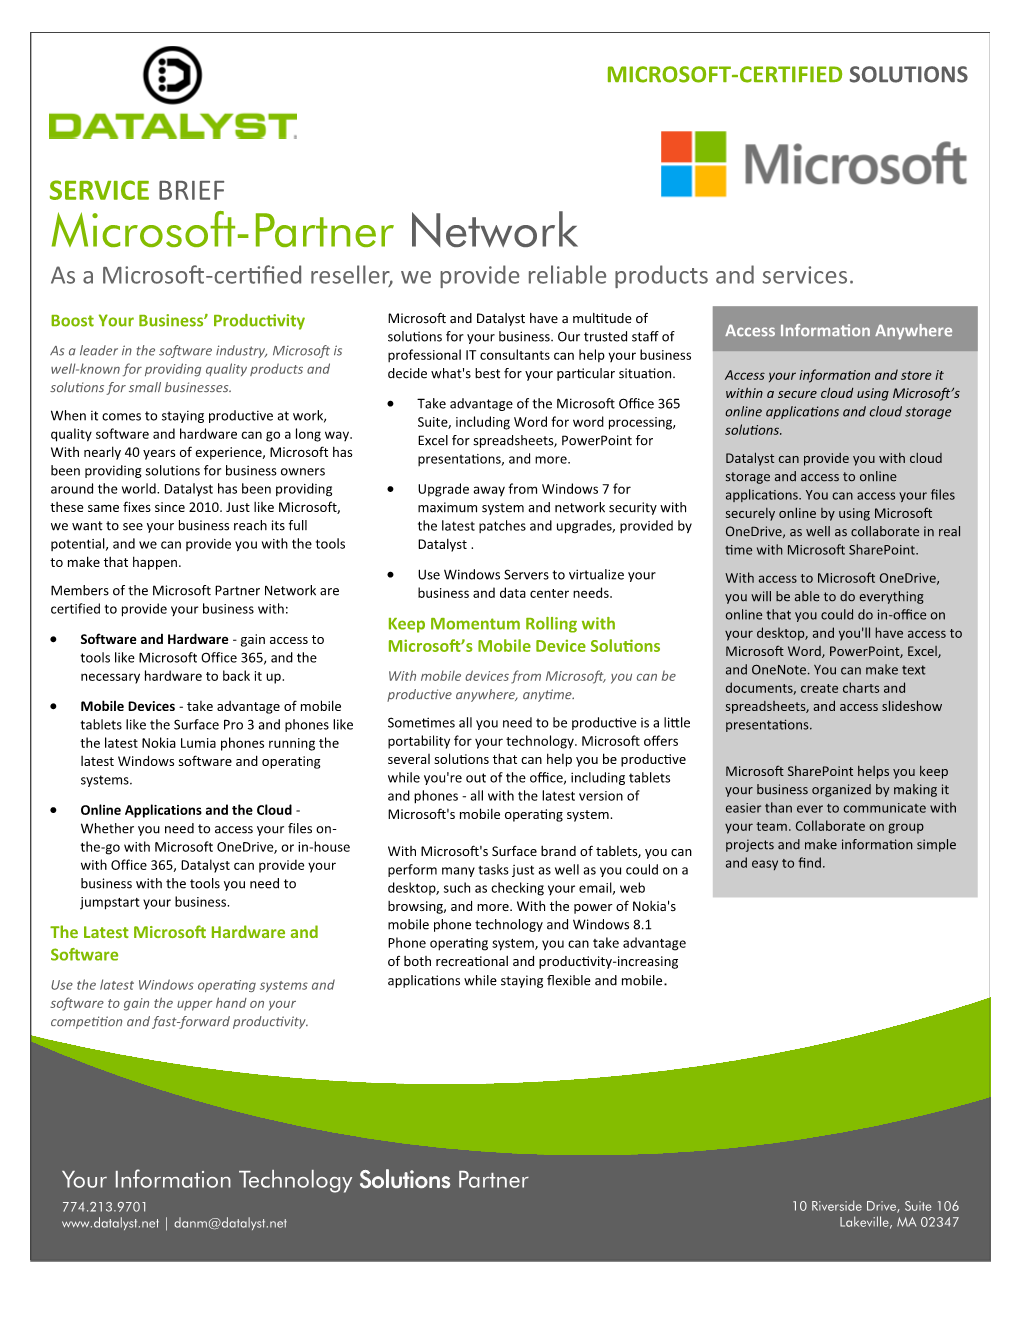 SERVICE BRIEF Microsoft-Partner Network As a Microsoft-Certified Reseller, We Provide Reliable Products and Services